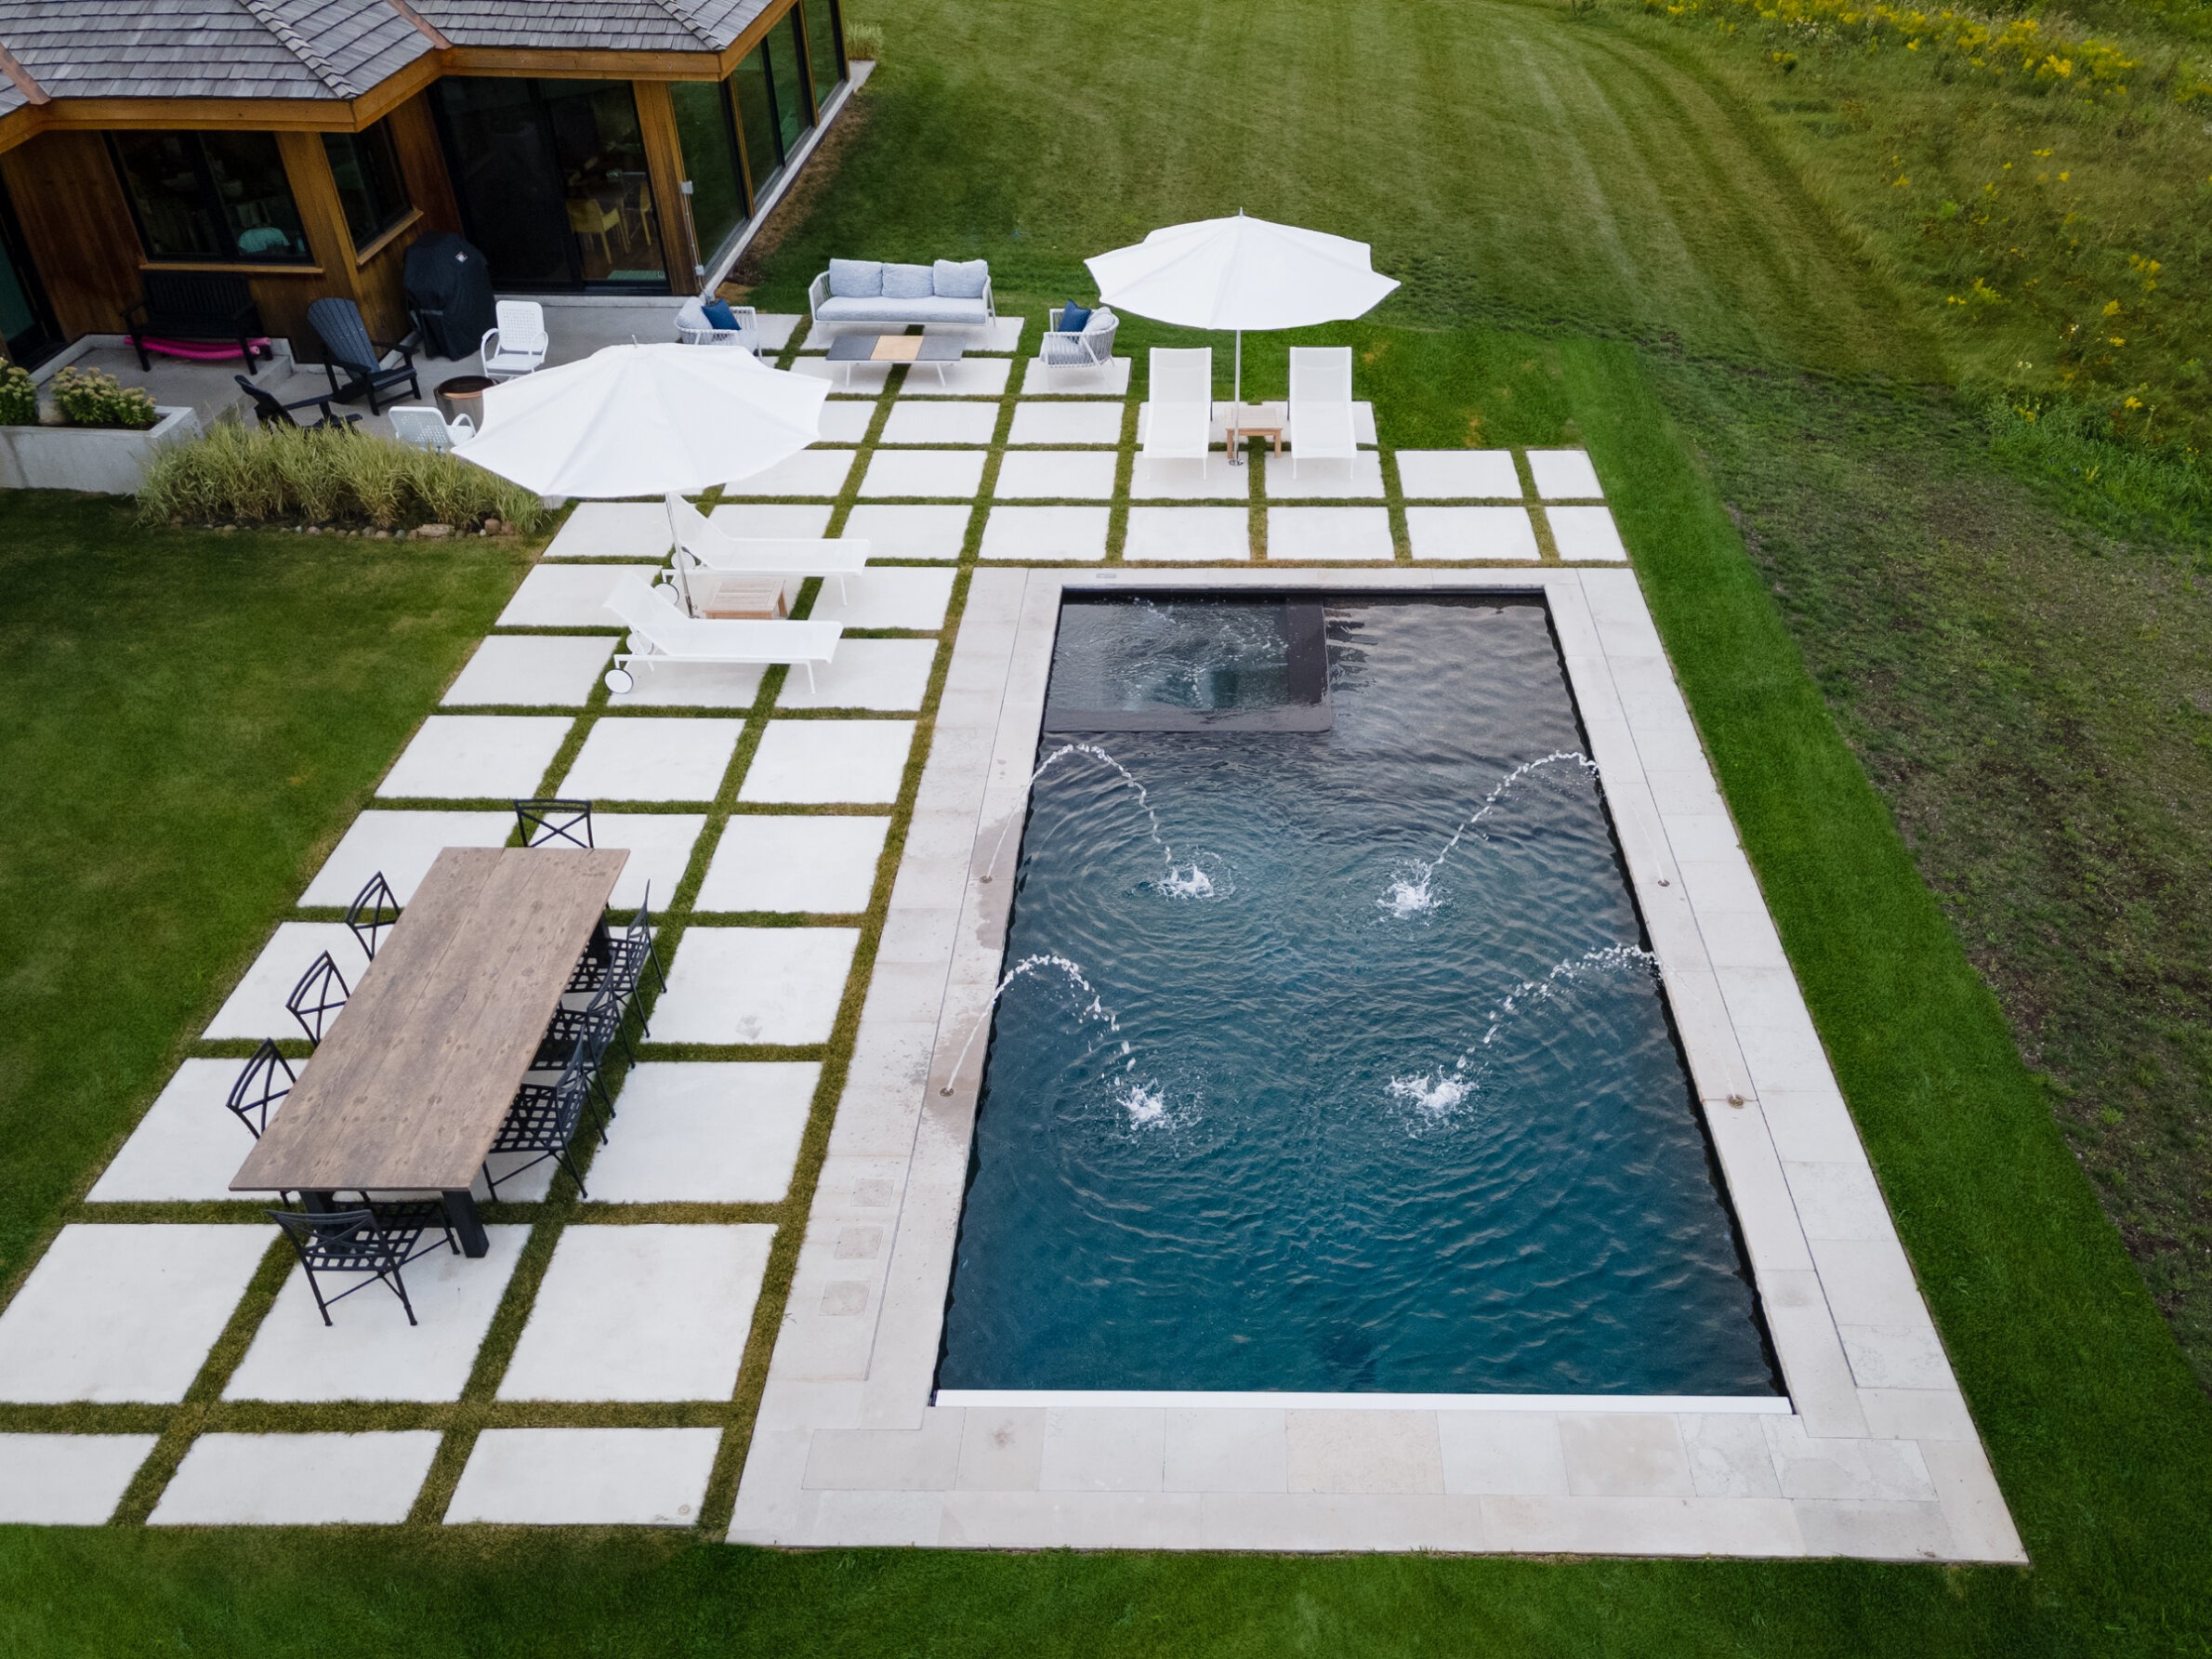 Aerial view of a backyard with a rectangular pool, fountain jets, a wooden dining table, sun loungers, umbrellas, and manicured grass with a house adjacent.